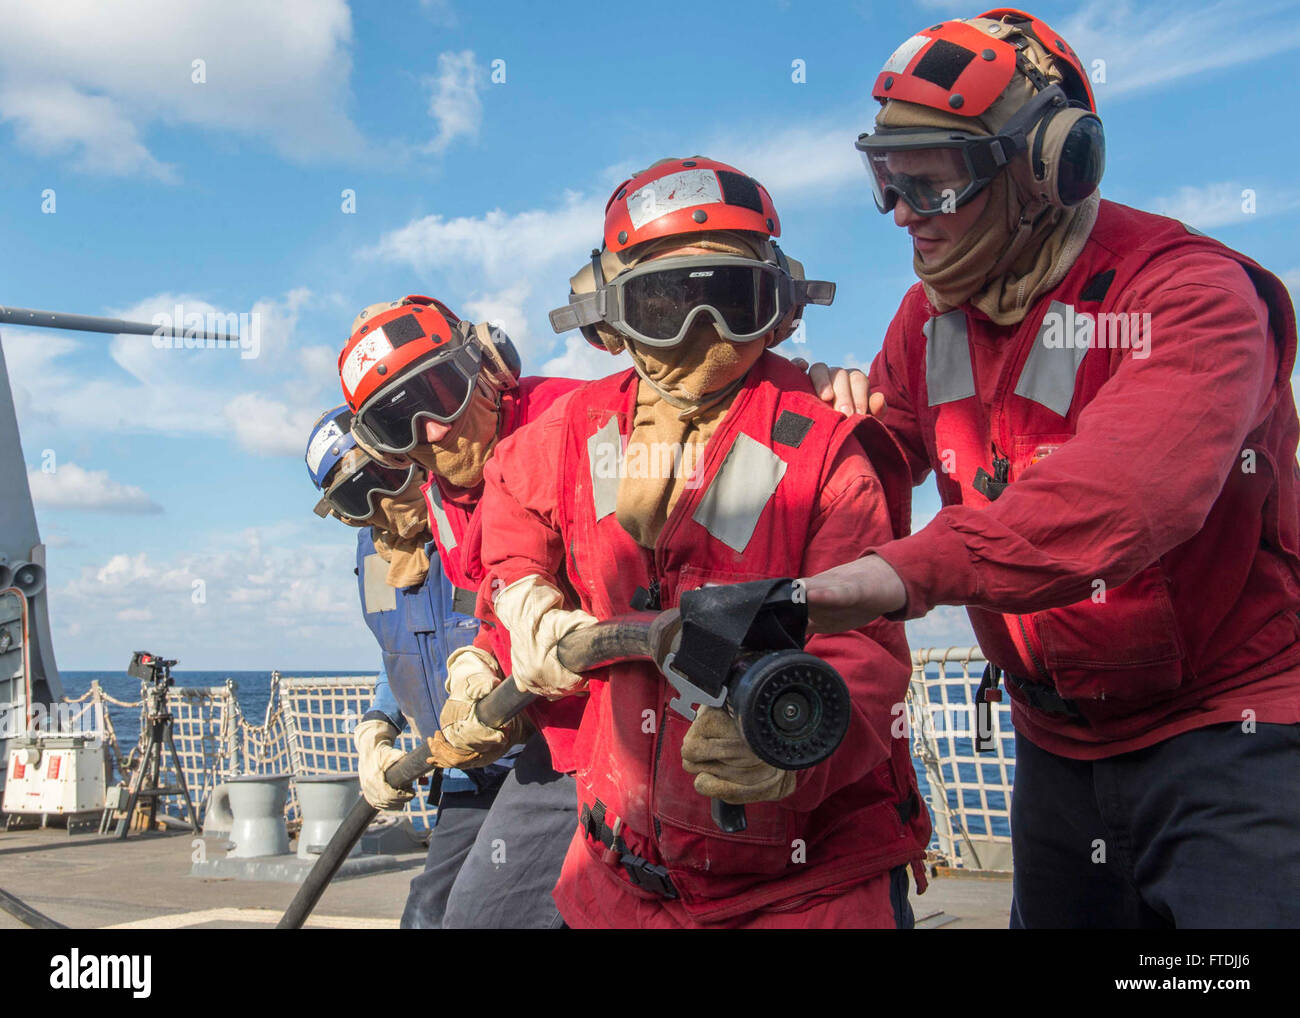 151207-N-AO823-179 AEGEAN SEA (Dec. 7, 2015) -- Sailors simulate fighting a fire during a training exercise on the flight deck of guided-missile destroyer USS Bulkeley (DDG 84). Bulkeley, part of the Harry S. Truman Carrier Strike Group, is conducting naval operations in the U.S. 6th Fleet area of operations in support of U.S. national security interests in Europe and Africa. (U.S. Navy photo by Mass Communication Specialist 2nd Class M.J. Lieberknecht/Released) Stock Photo